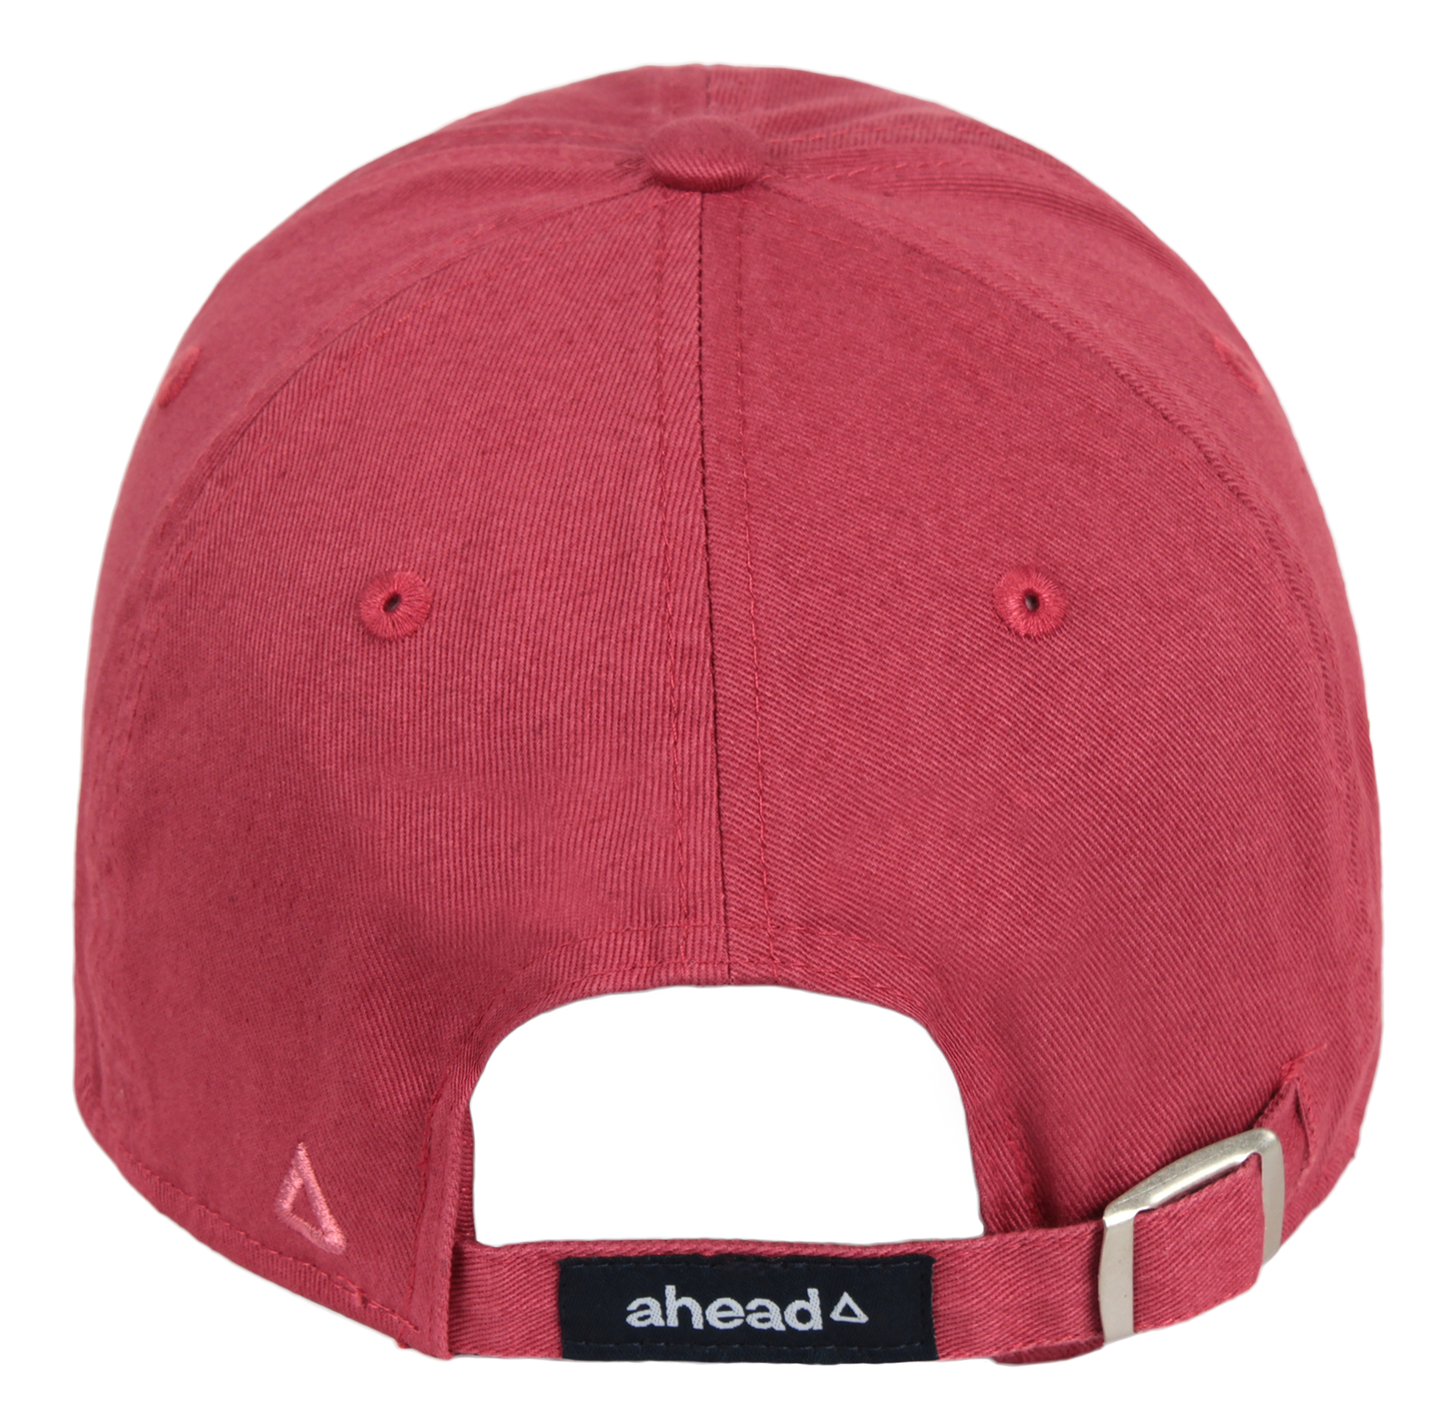 U.S. Open Red Washed Cotton Twill Relaxed Fit Cap